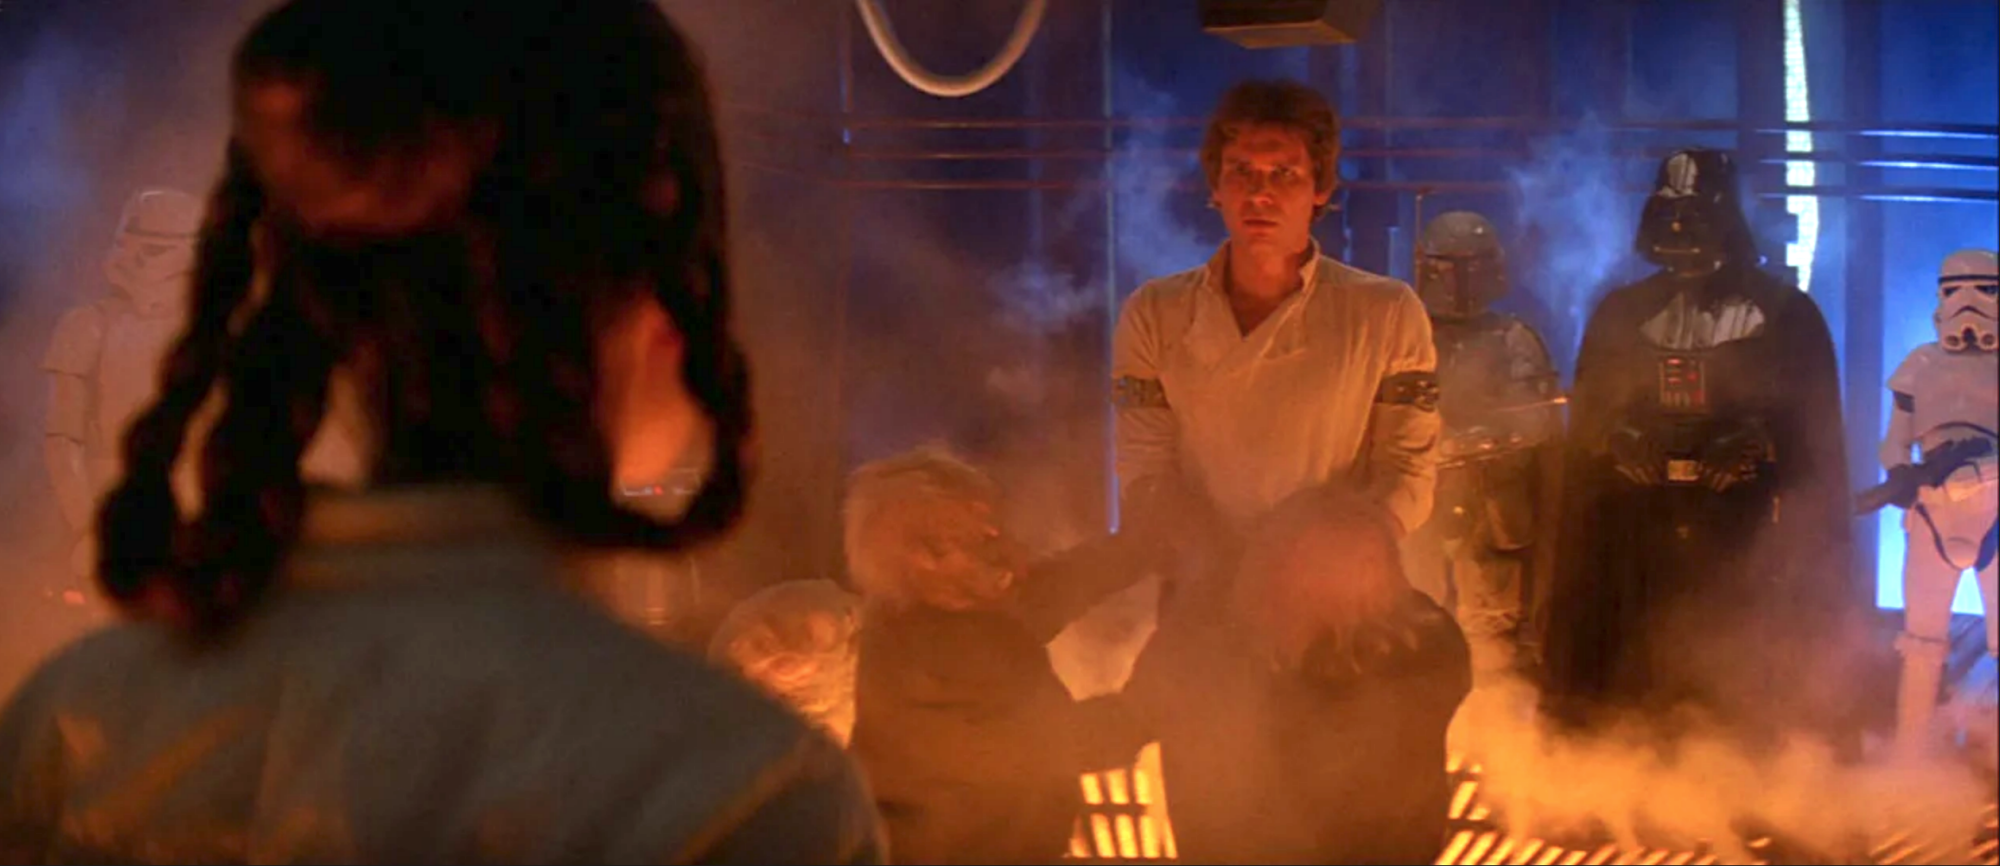 Princess Leia and Han Solo in Cloud City